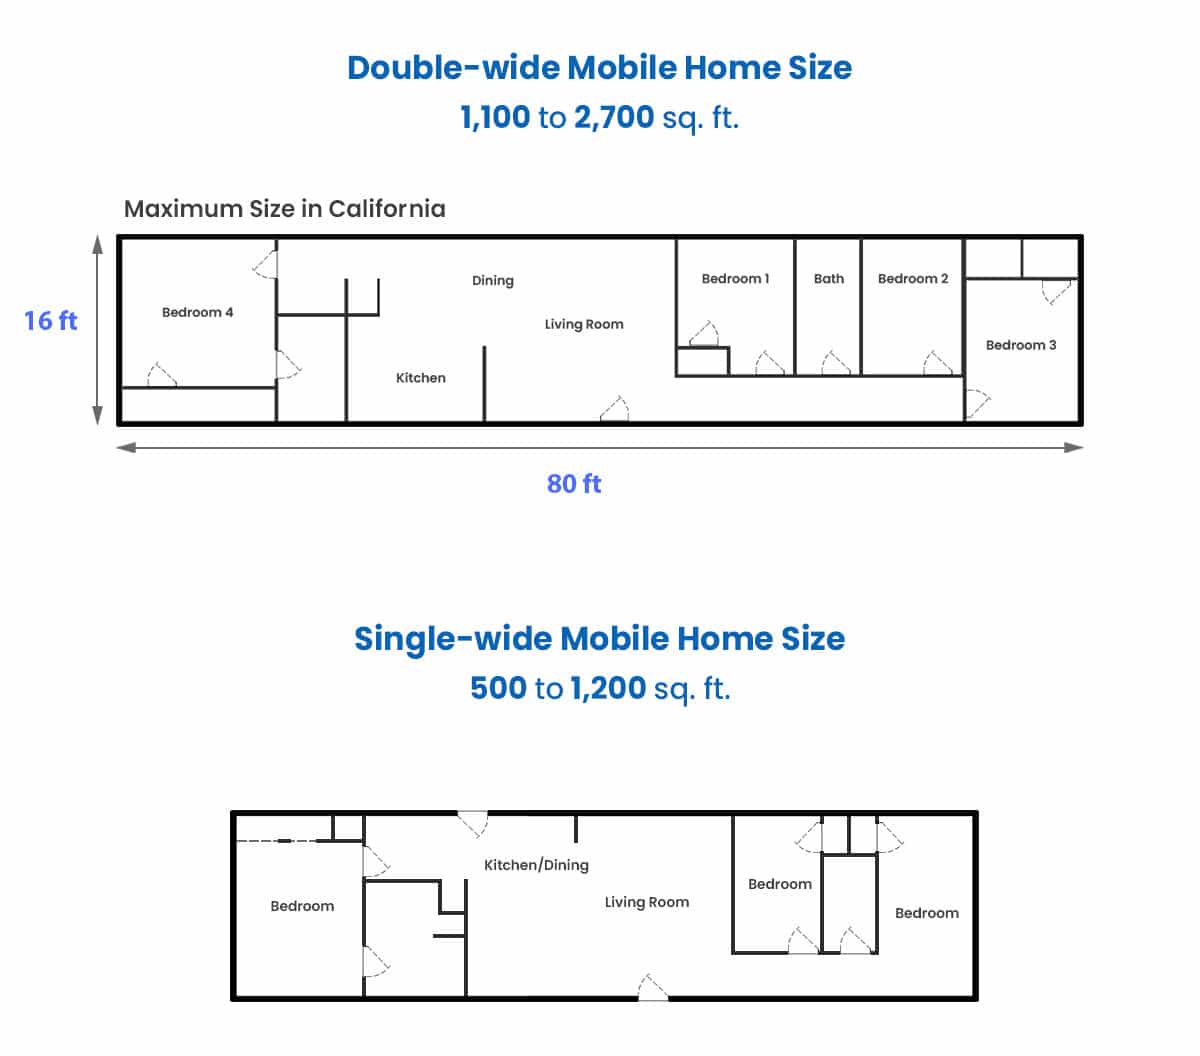 Double wide and single wide mobile home size